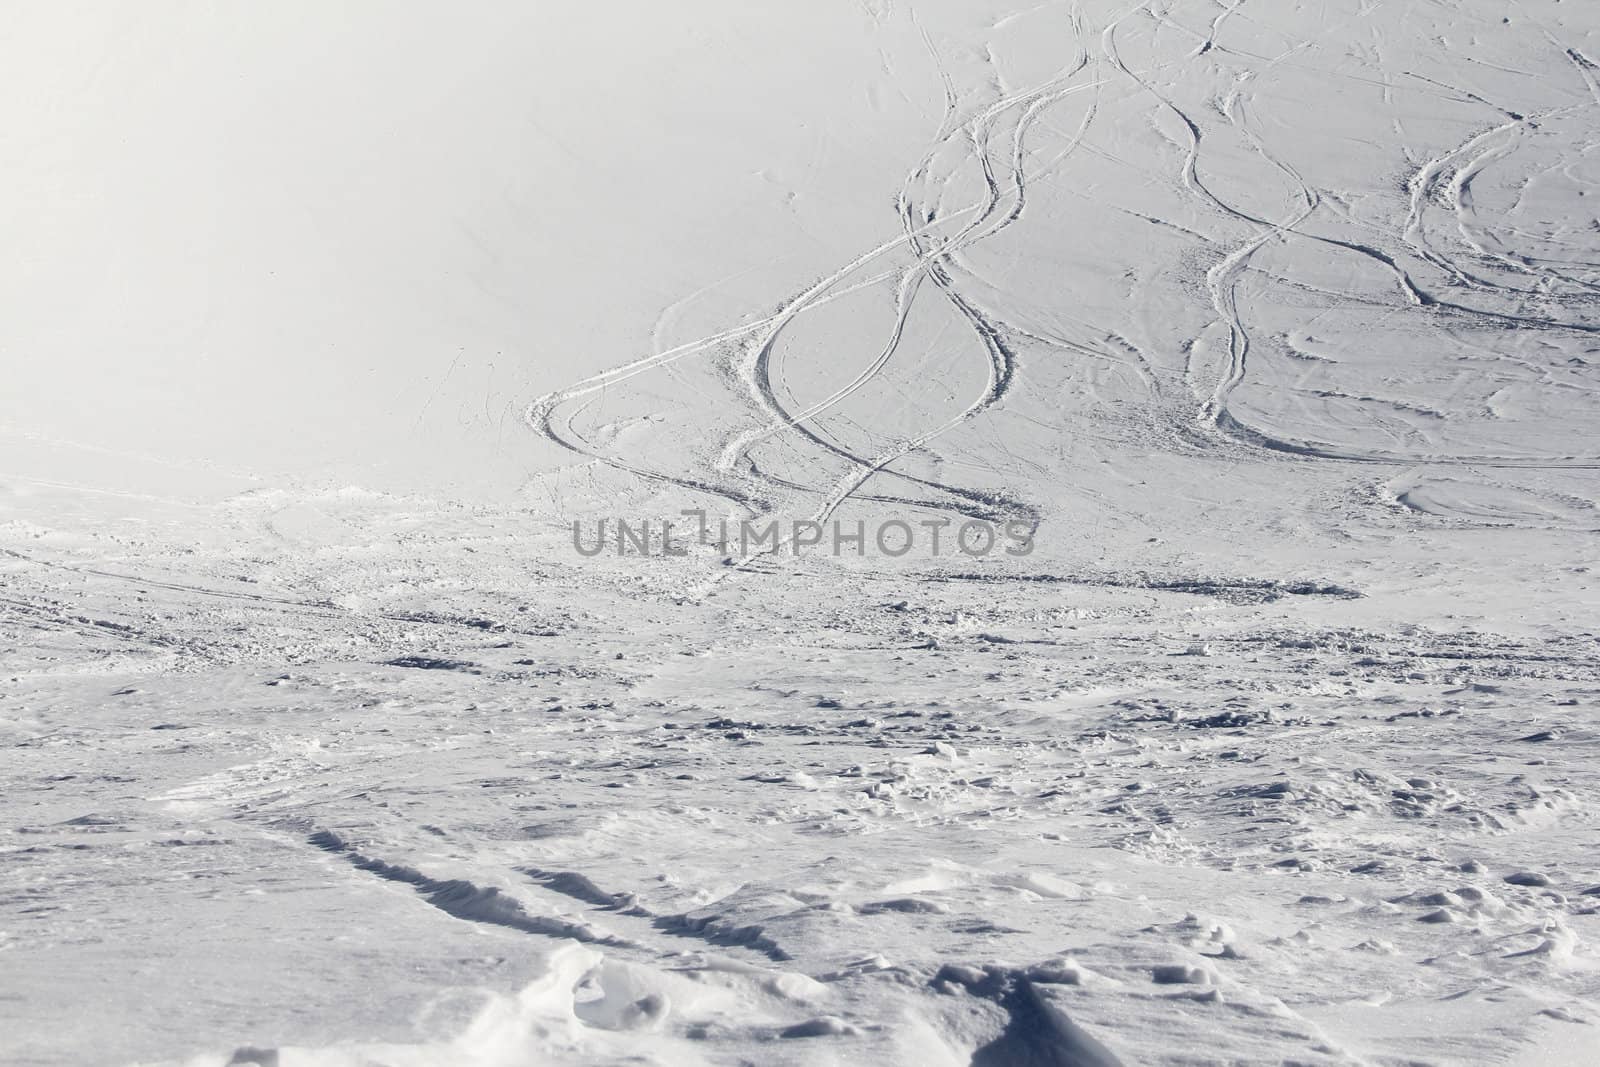 Ski traces on snow in winter mountains